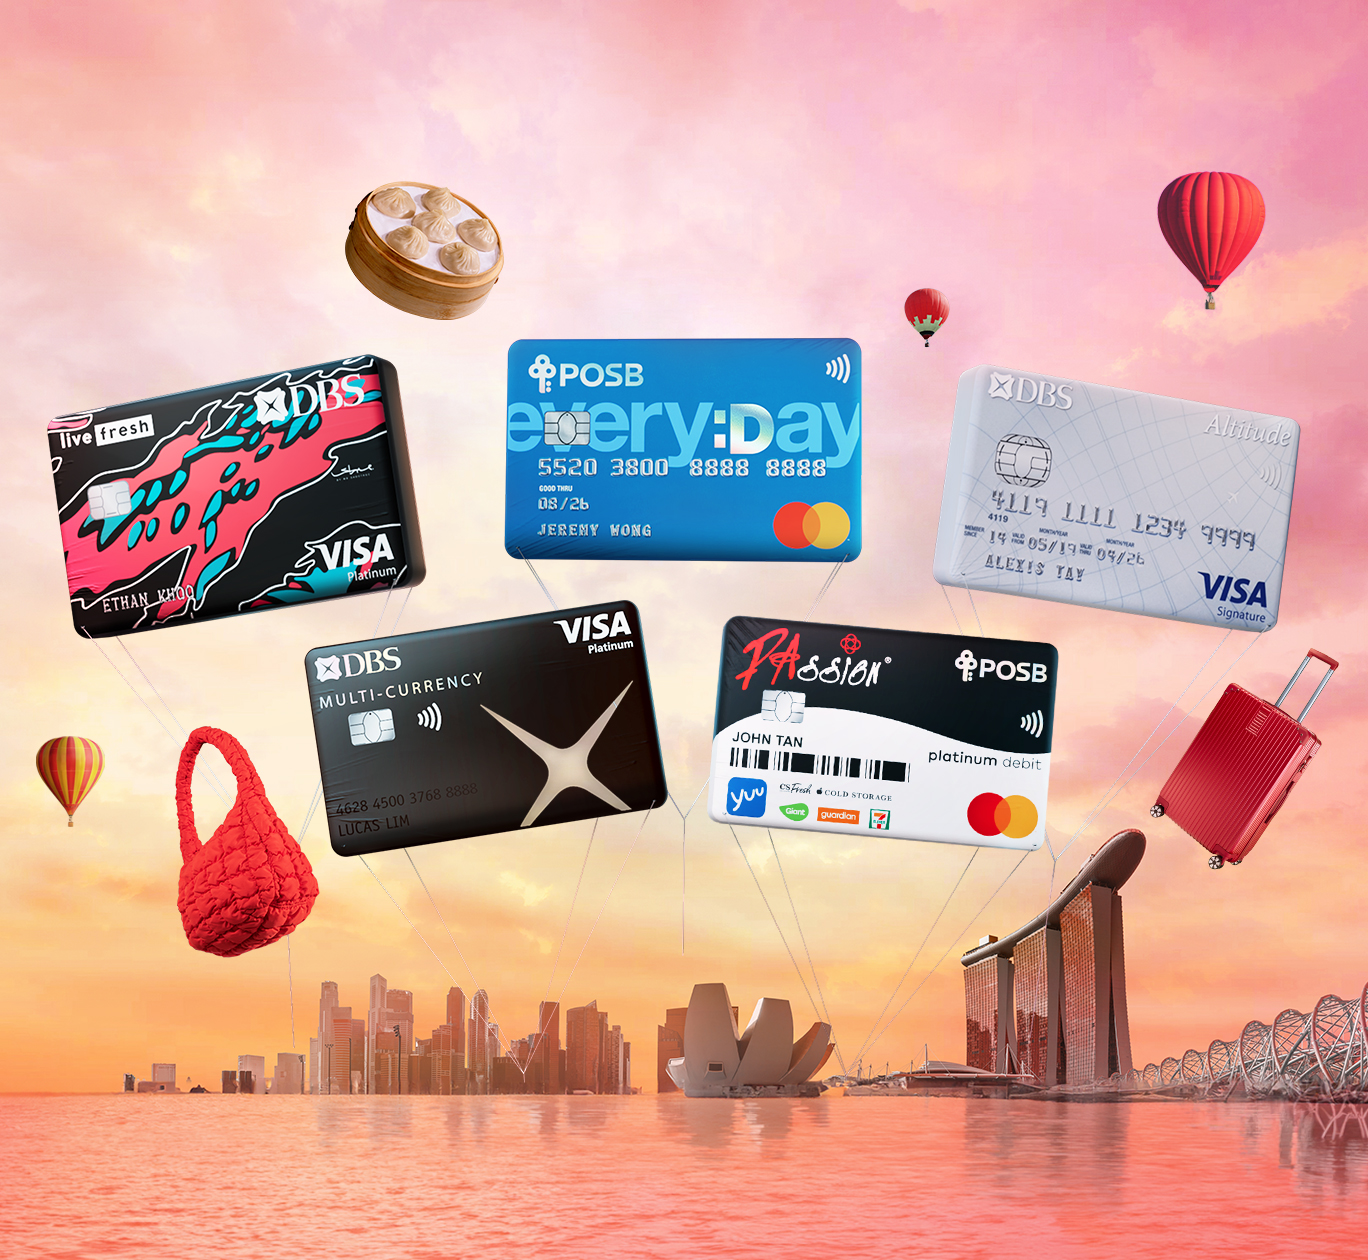 Power up on more rewards with DBS/POSB Credit Cards